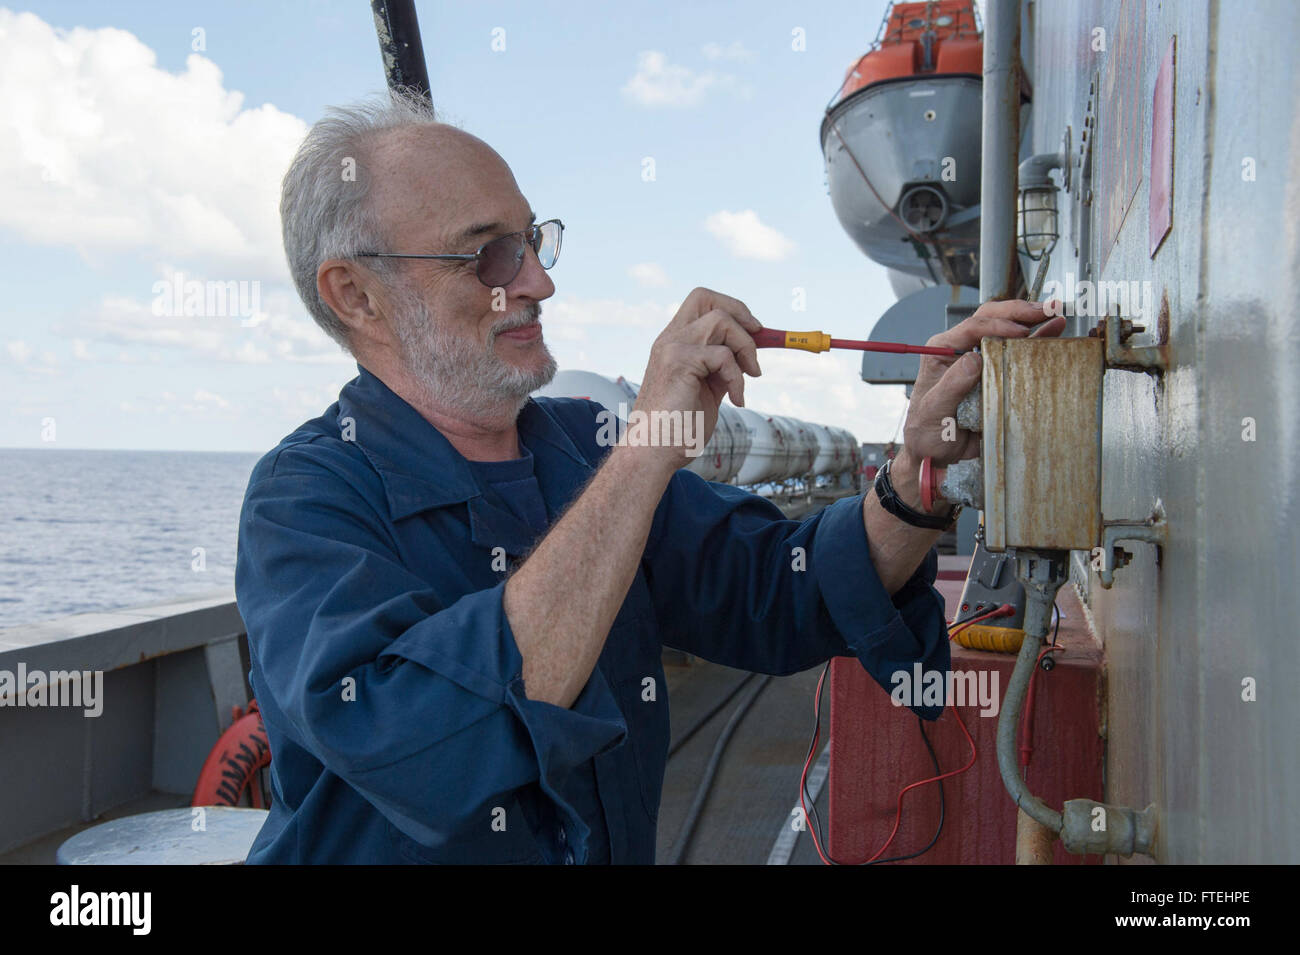 MEDITERRANEAN SEA (Oct. 28, 2014) – Civil service mariner Chief Electrician Jeff Patterson works on the flight deck fire protection system aboard the fleet replenishment oiler USNS Leroy Grumman (T-AO 195). Grumman, the Military Sealift Command Mediterranean Sea duty oiler, is forward-deployed to the U.S. 6th Fleet area of operations in support of national security interests in Europe and Africa. Stock Photo